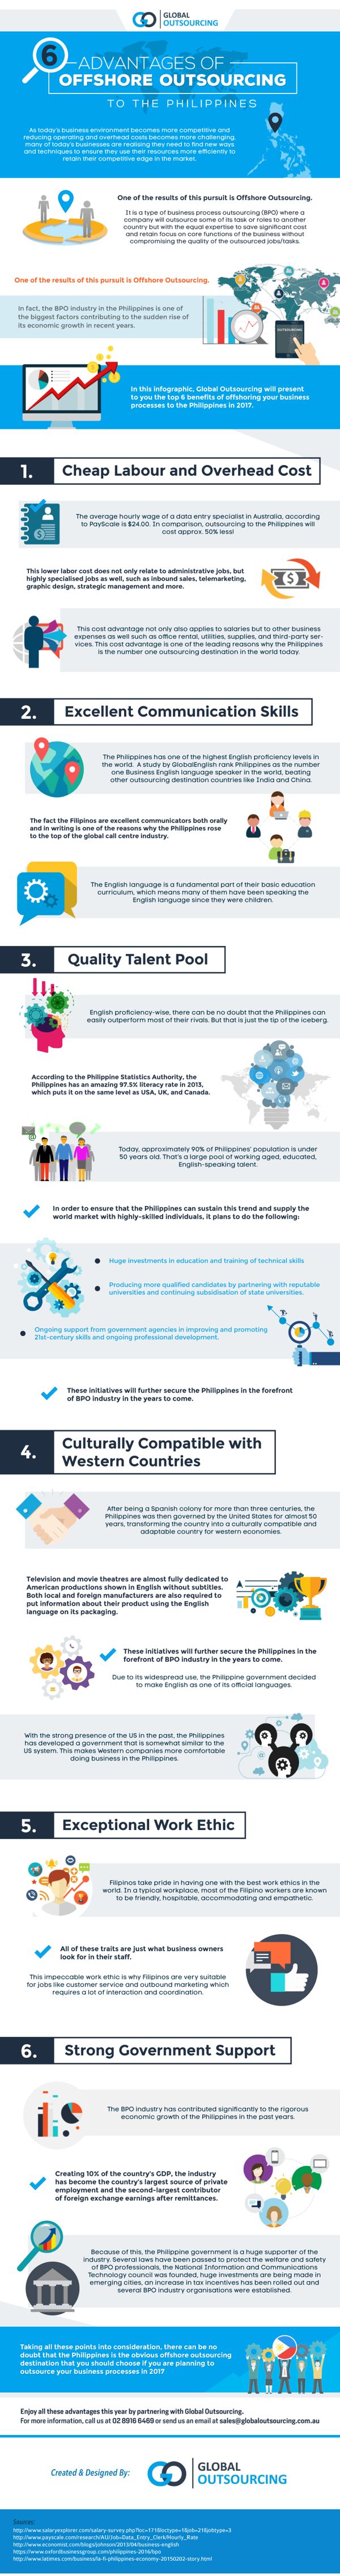 6 Advantages of Offshore Outsourcing to the Philippines 1